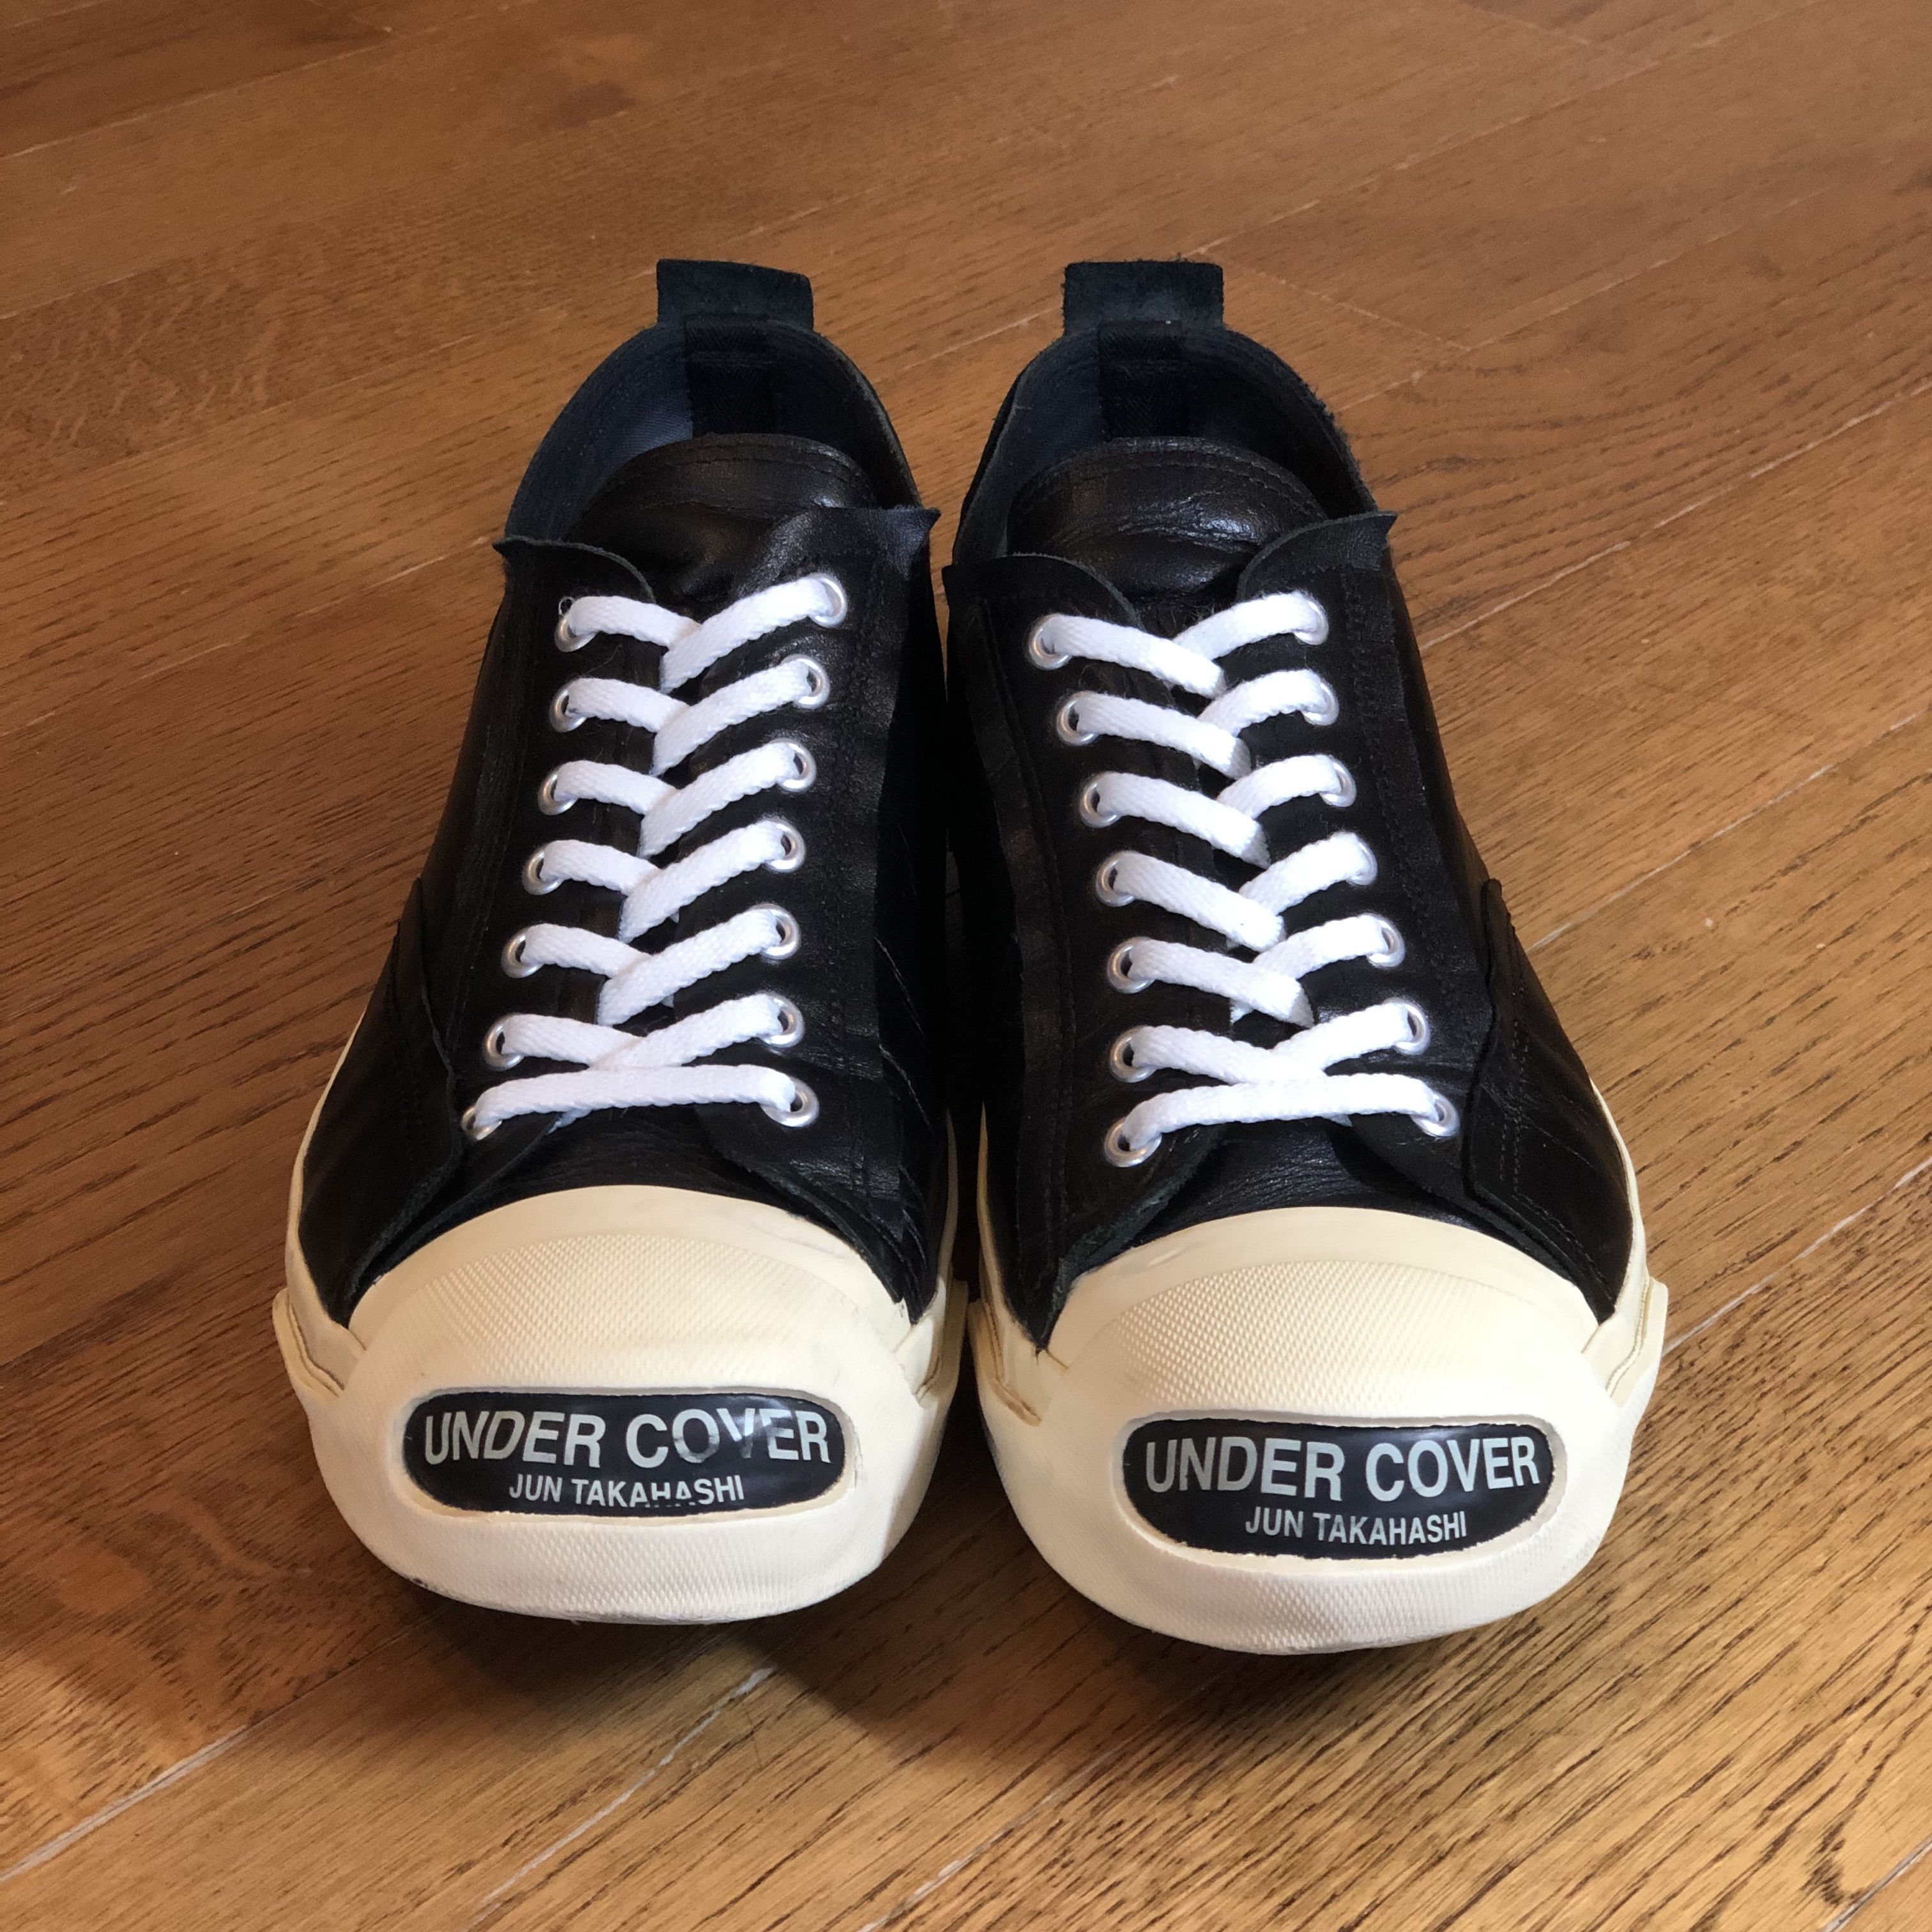 Undercover Undercover by Jun Takahashi Leather Jack Purcell Sneaker Size US 11 / EU 44 - 2 Preview